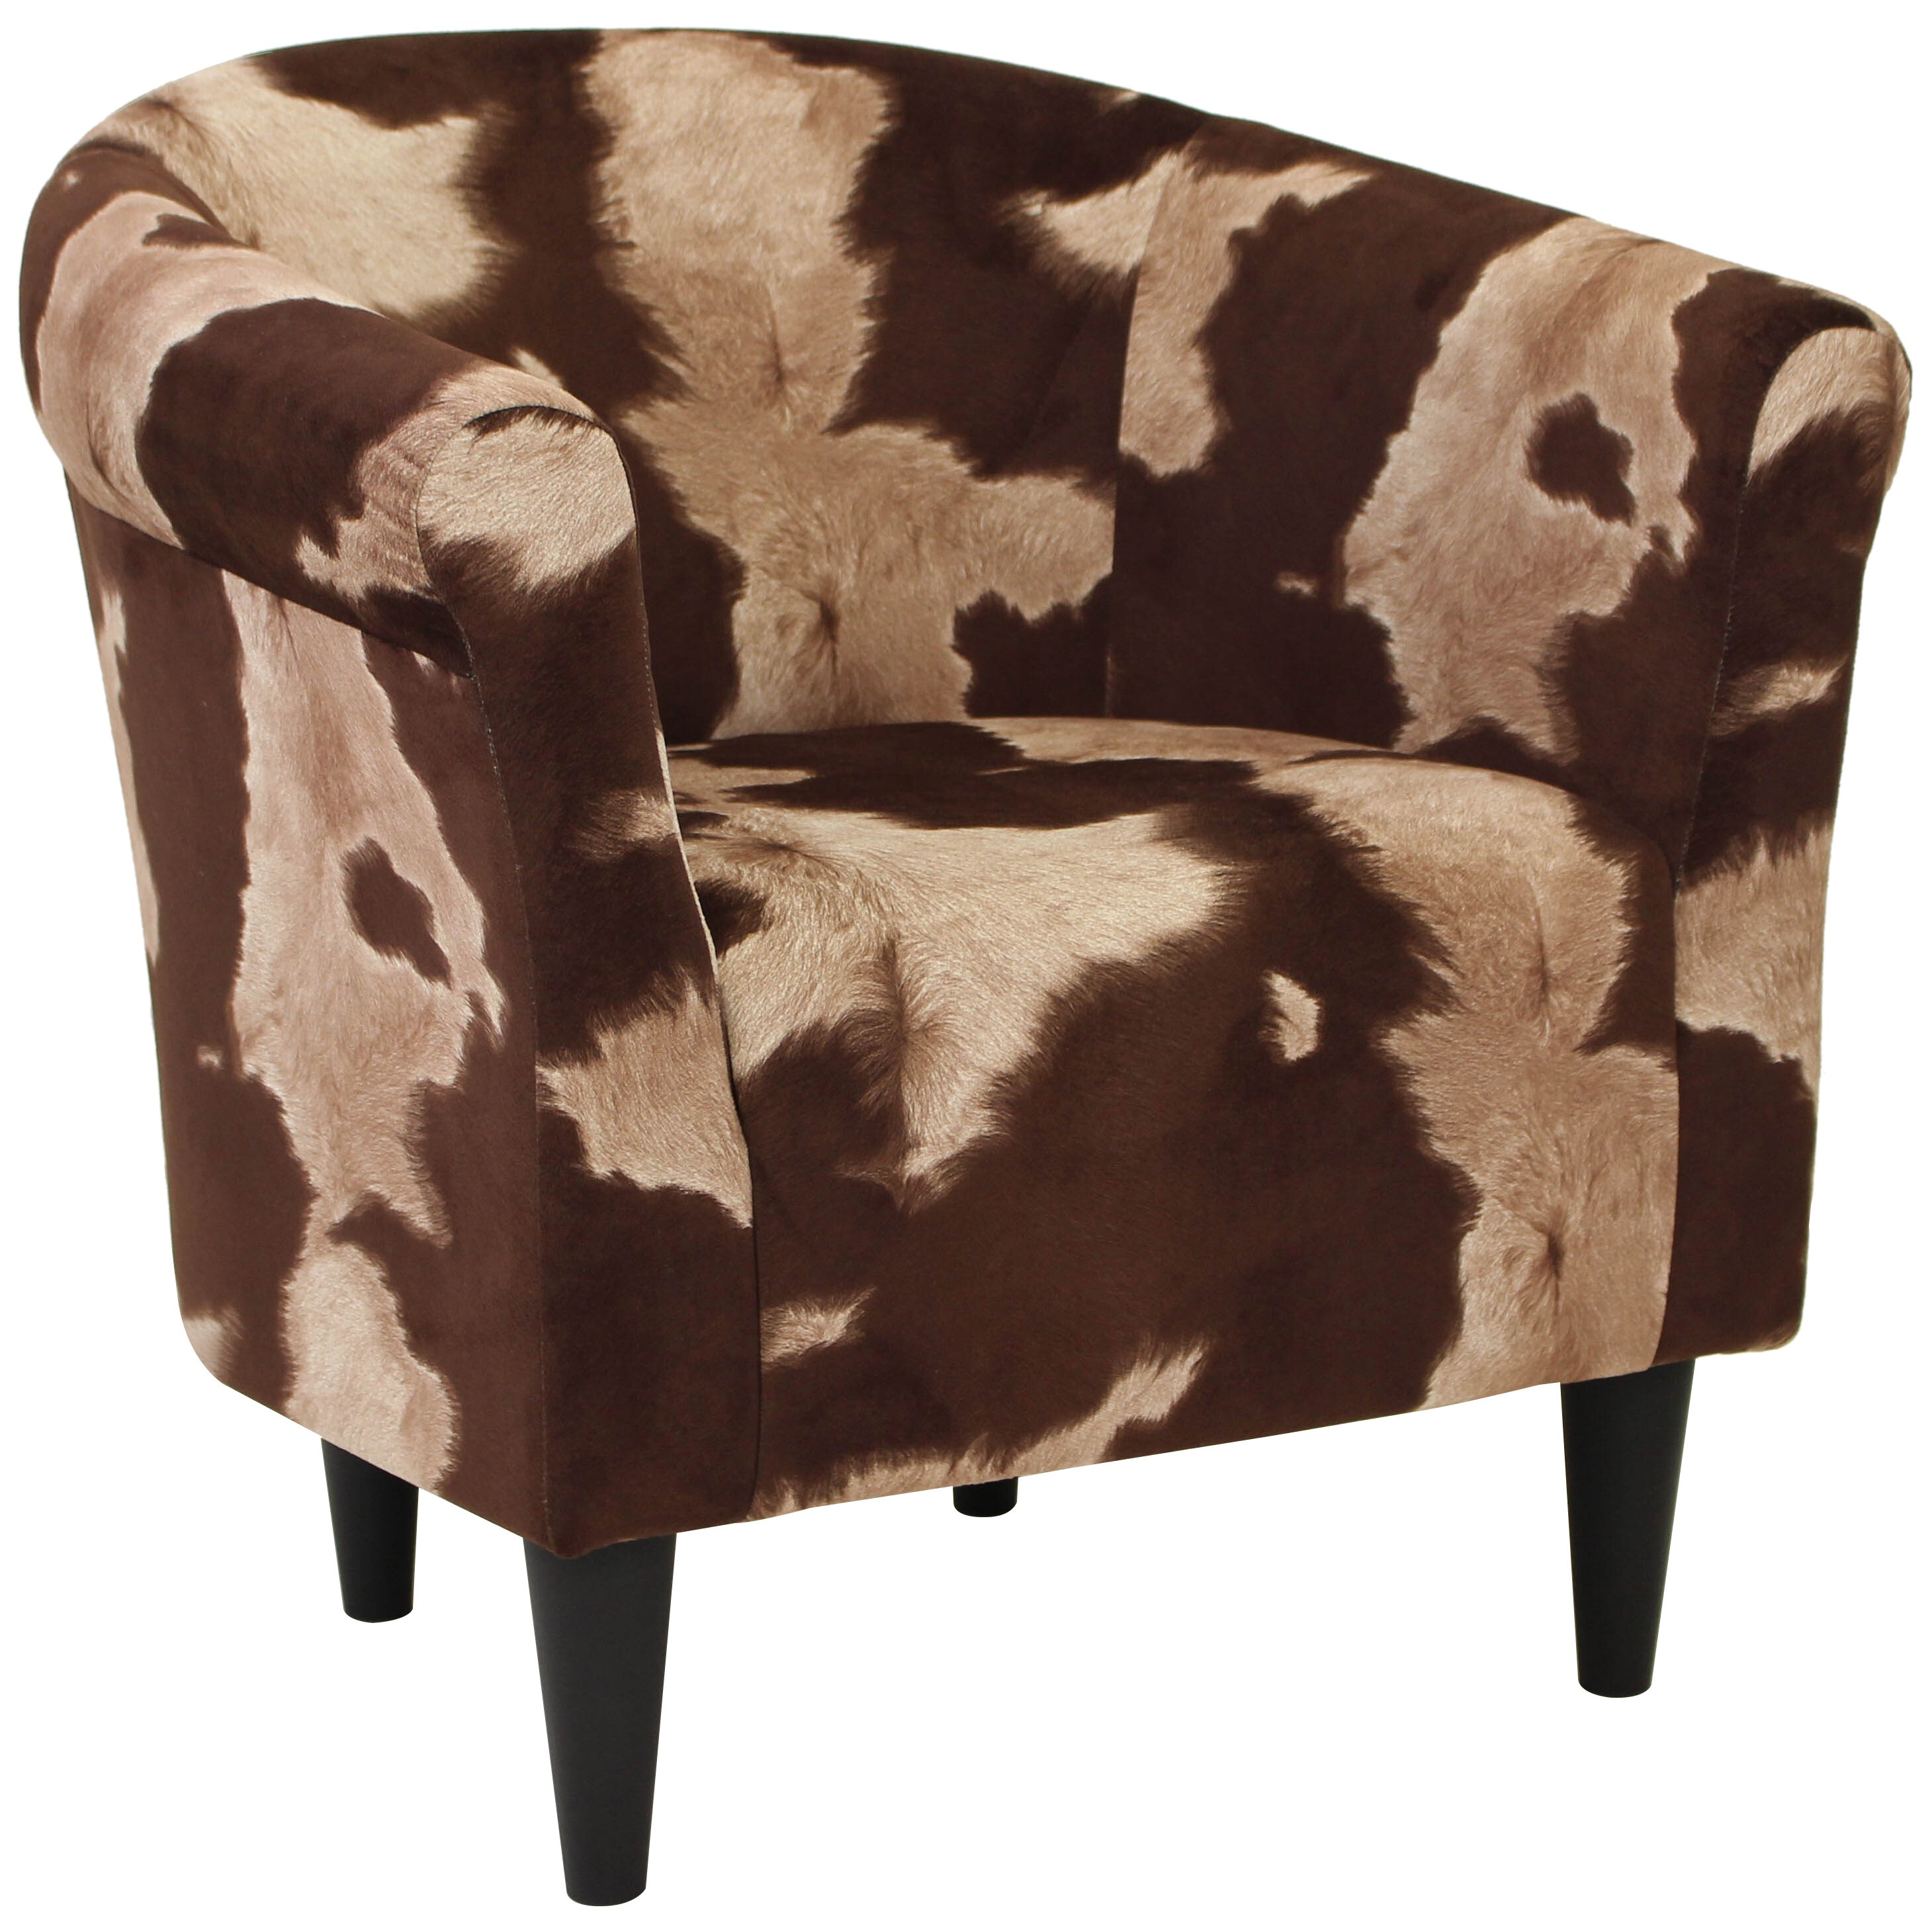 Cow Hide Accent Chairs - VisualHunt